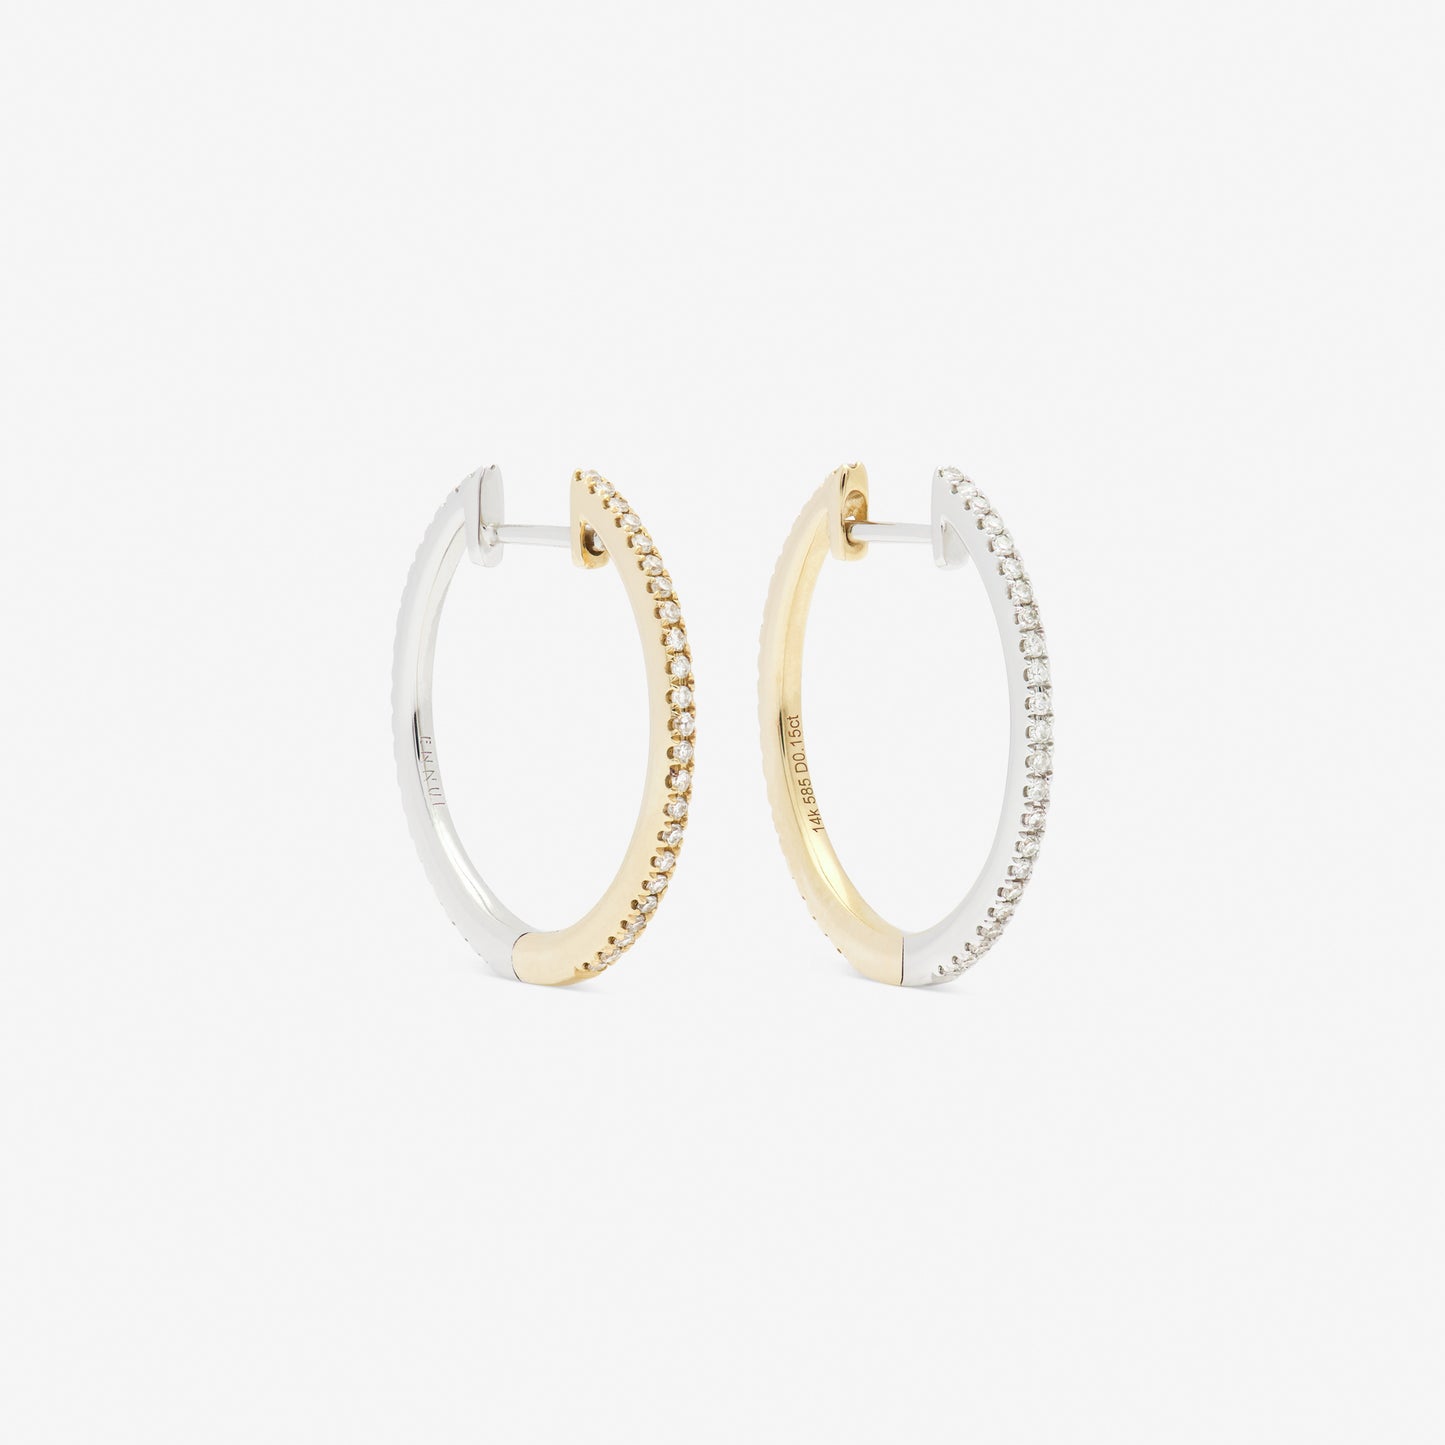 20mm hoop pair in white and yellow gold